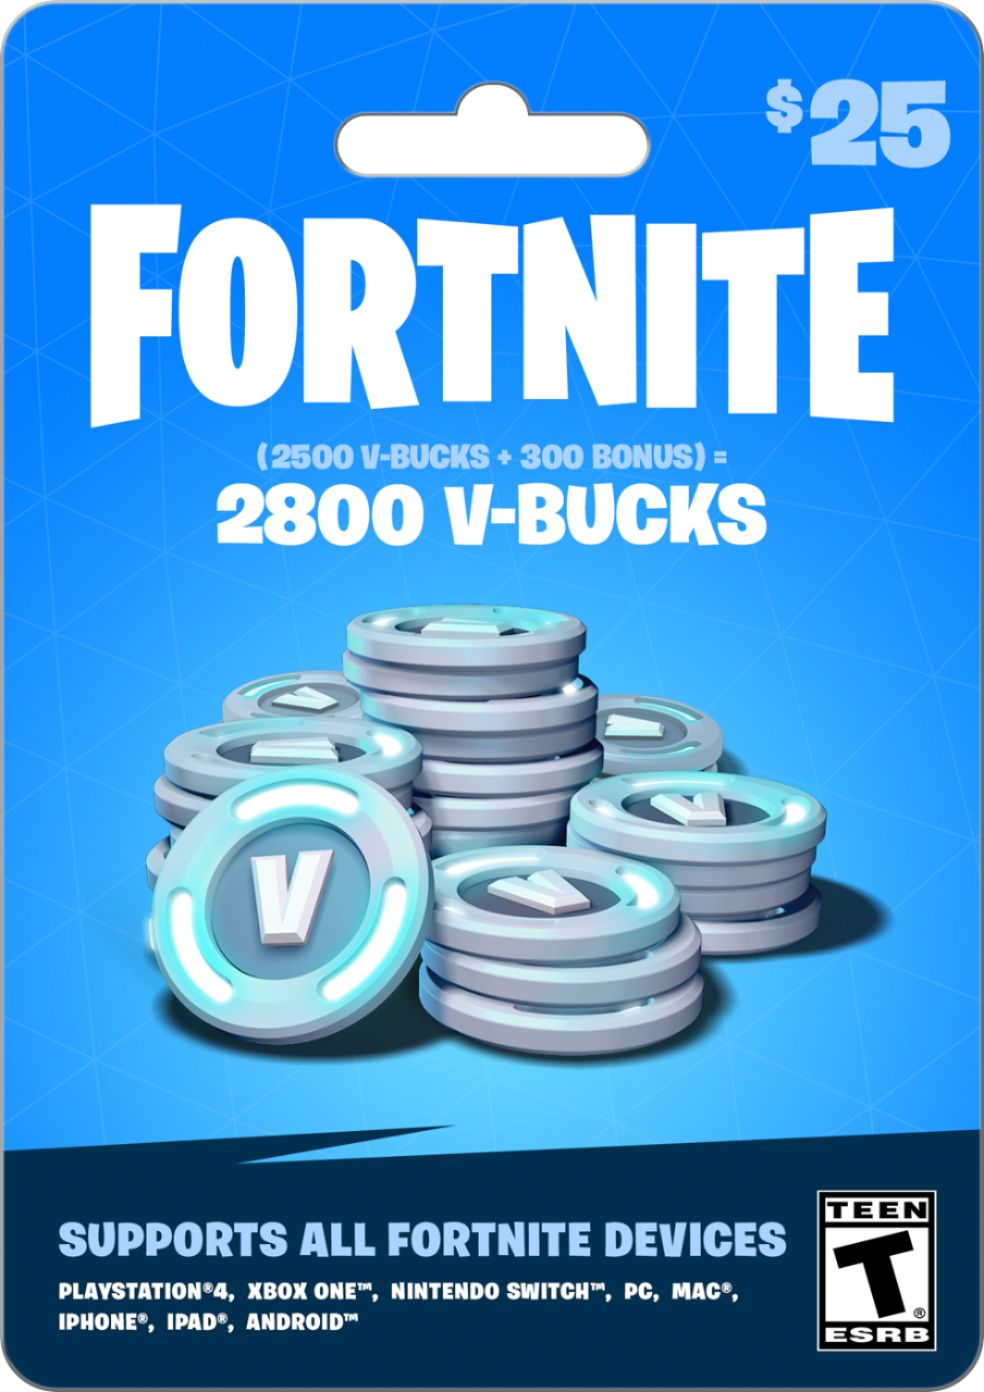 can u use xbox gift cards for fortnite